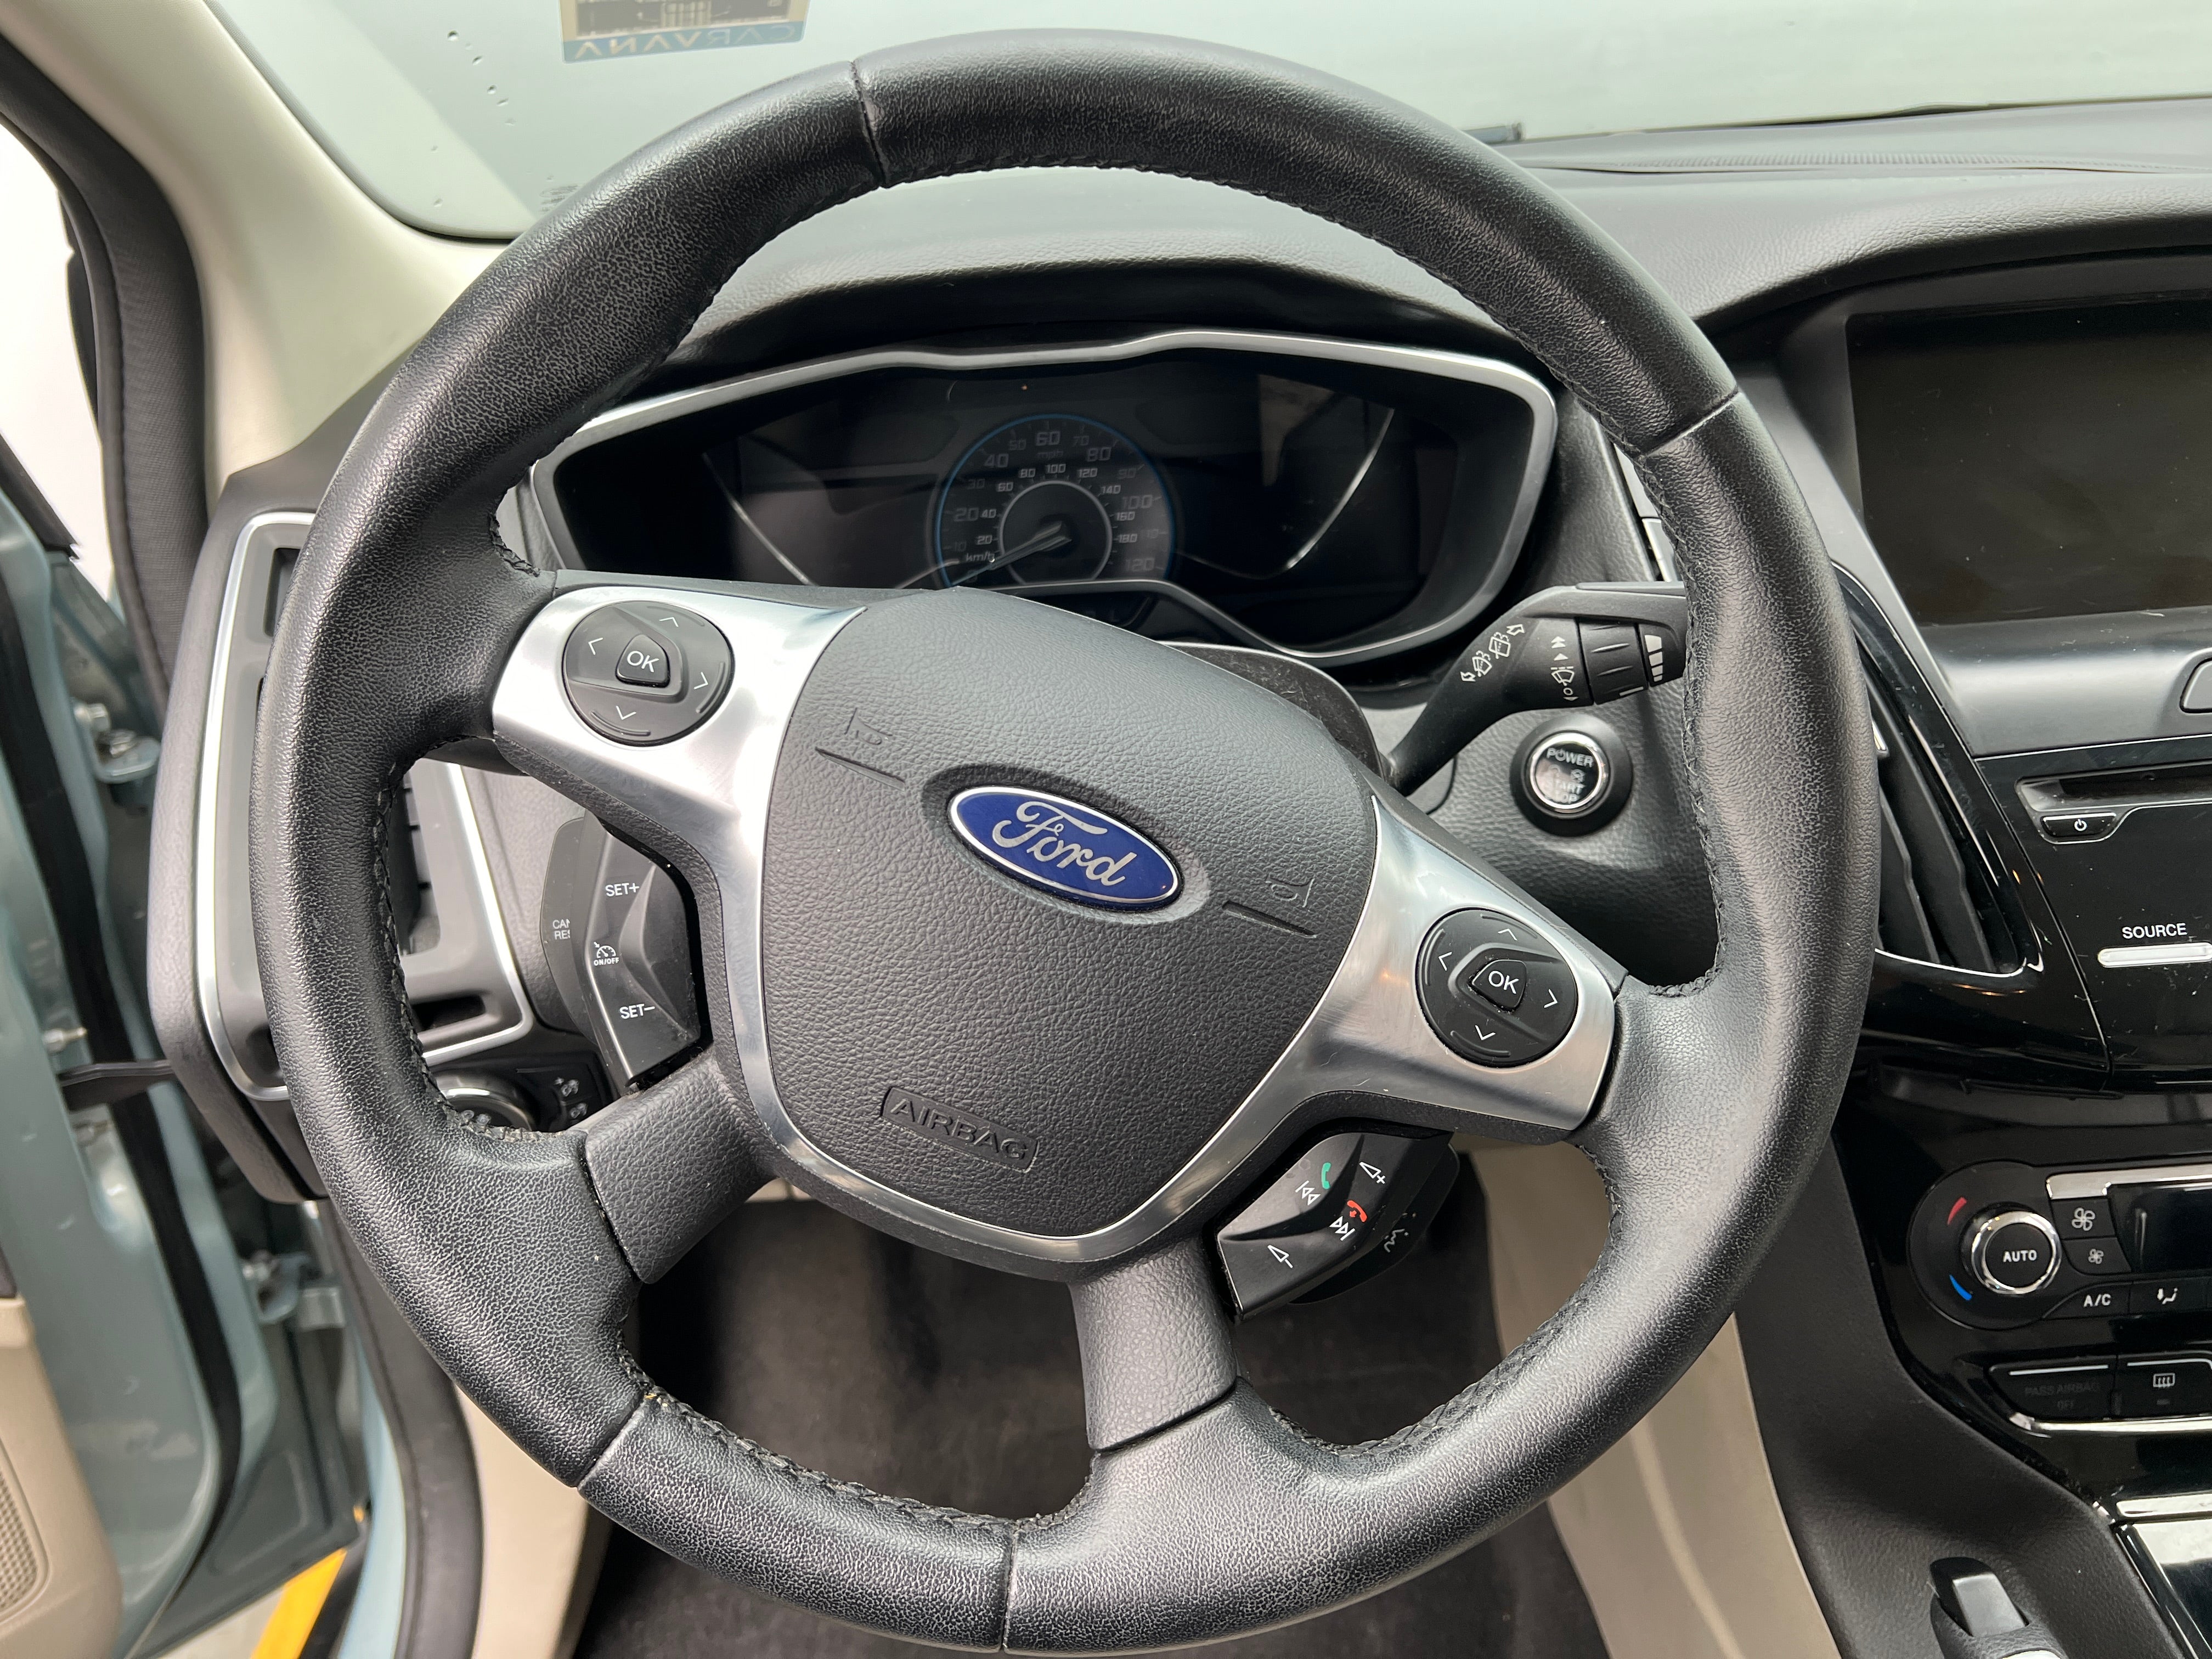 Used 2013 Ford Focus Electric with VIN 1FADP3R4XDL319453 for sale in South Chesterfield, VA